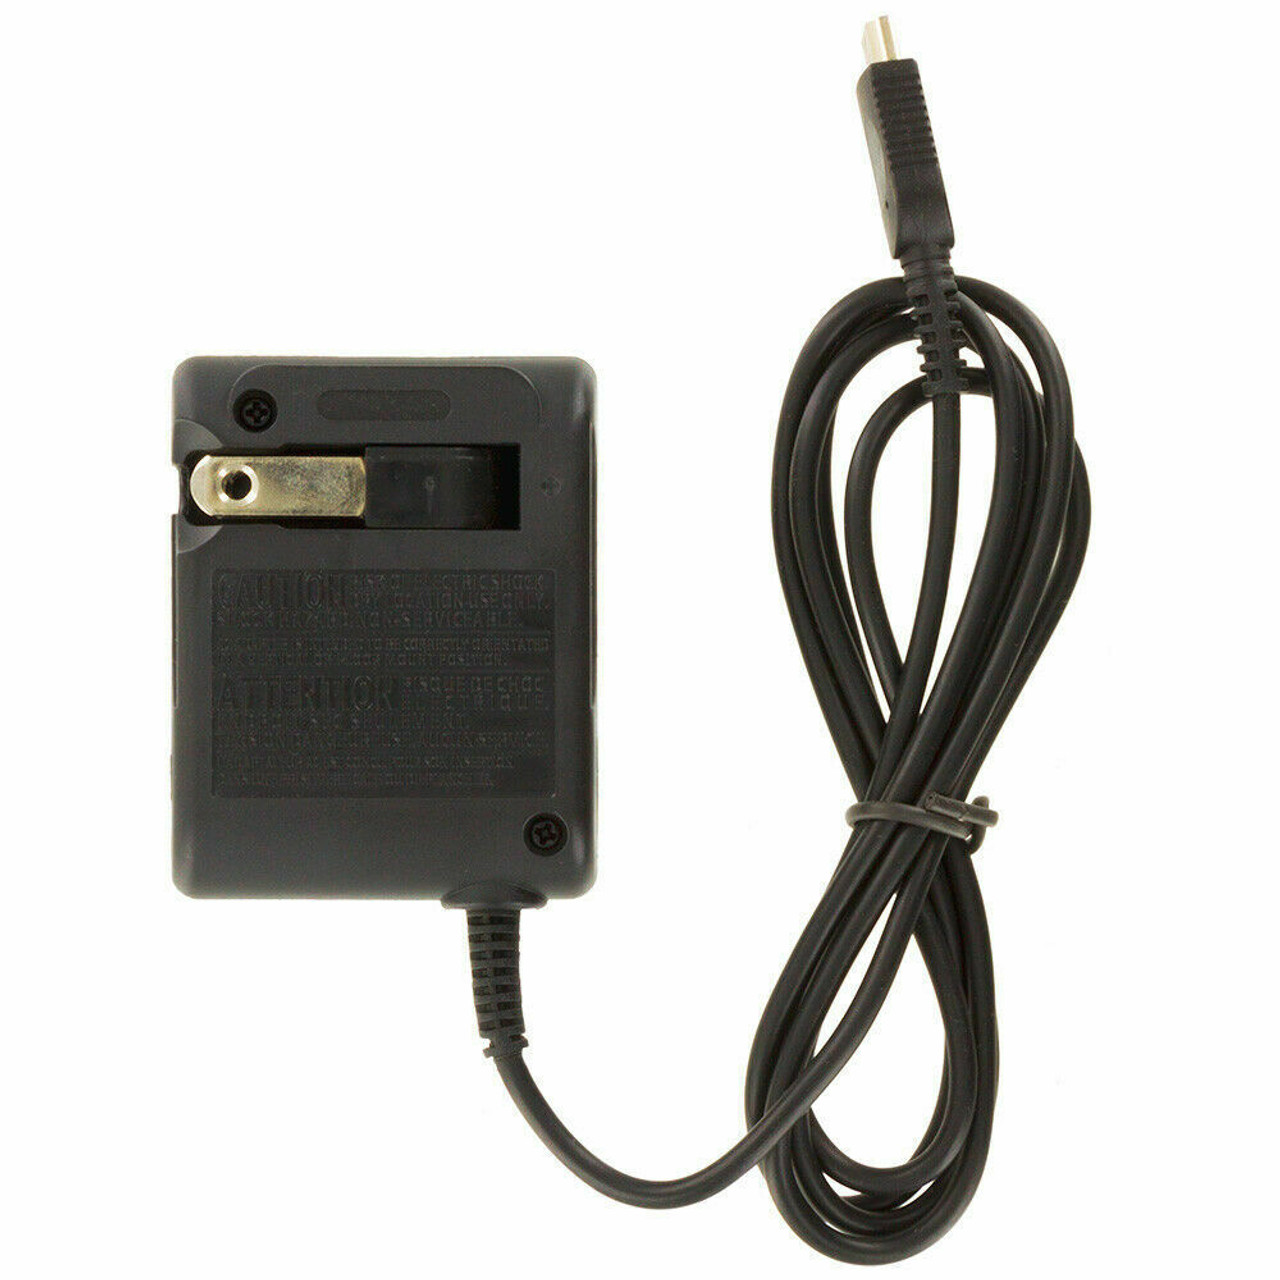 OEM Wall Adapter Charger Power For Nintendo DS Game Boy Advance GBA SP NTR-002